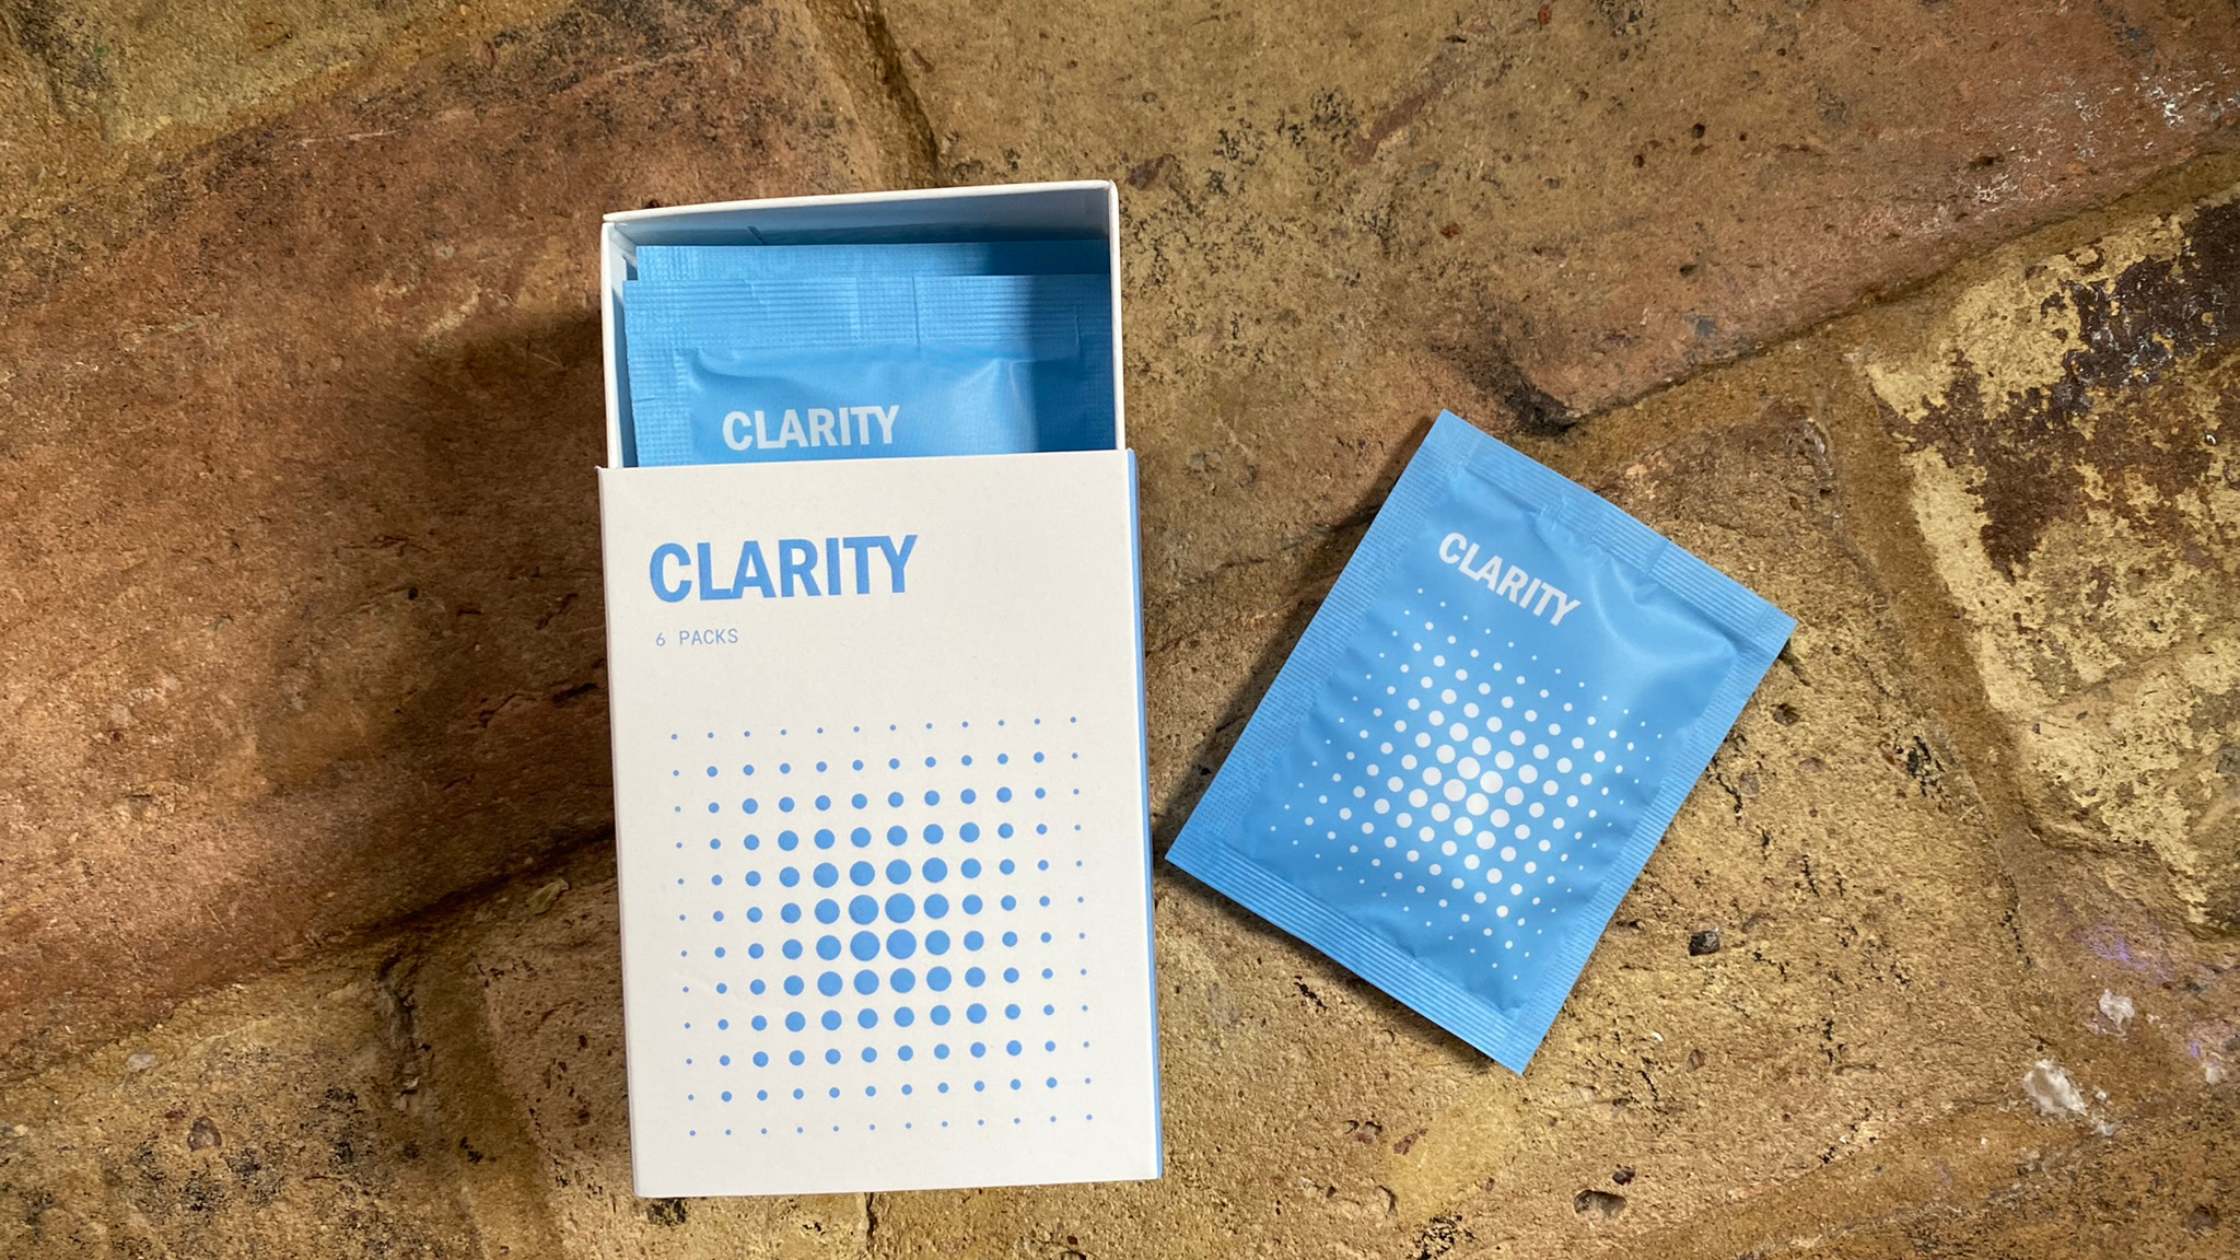 A box of Thesis Clarity lion's mane supplements with the sachet containing the pills to the right